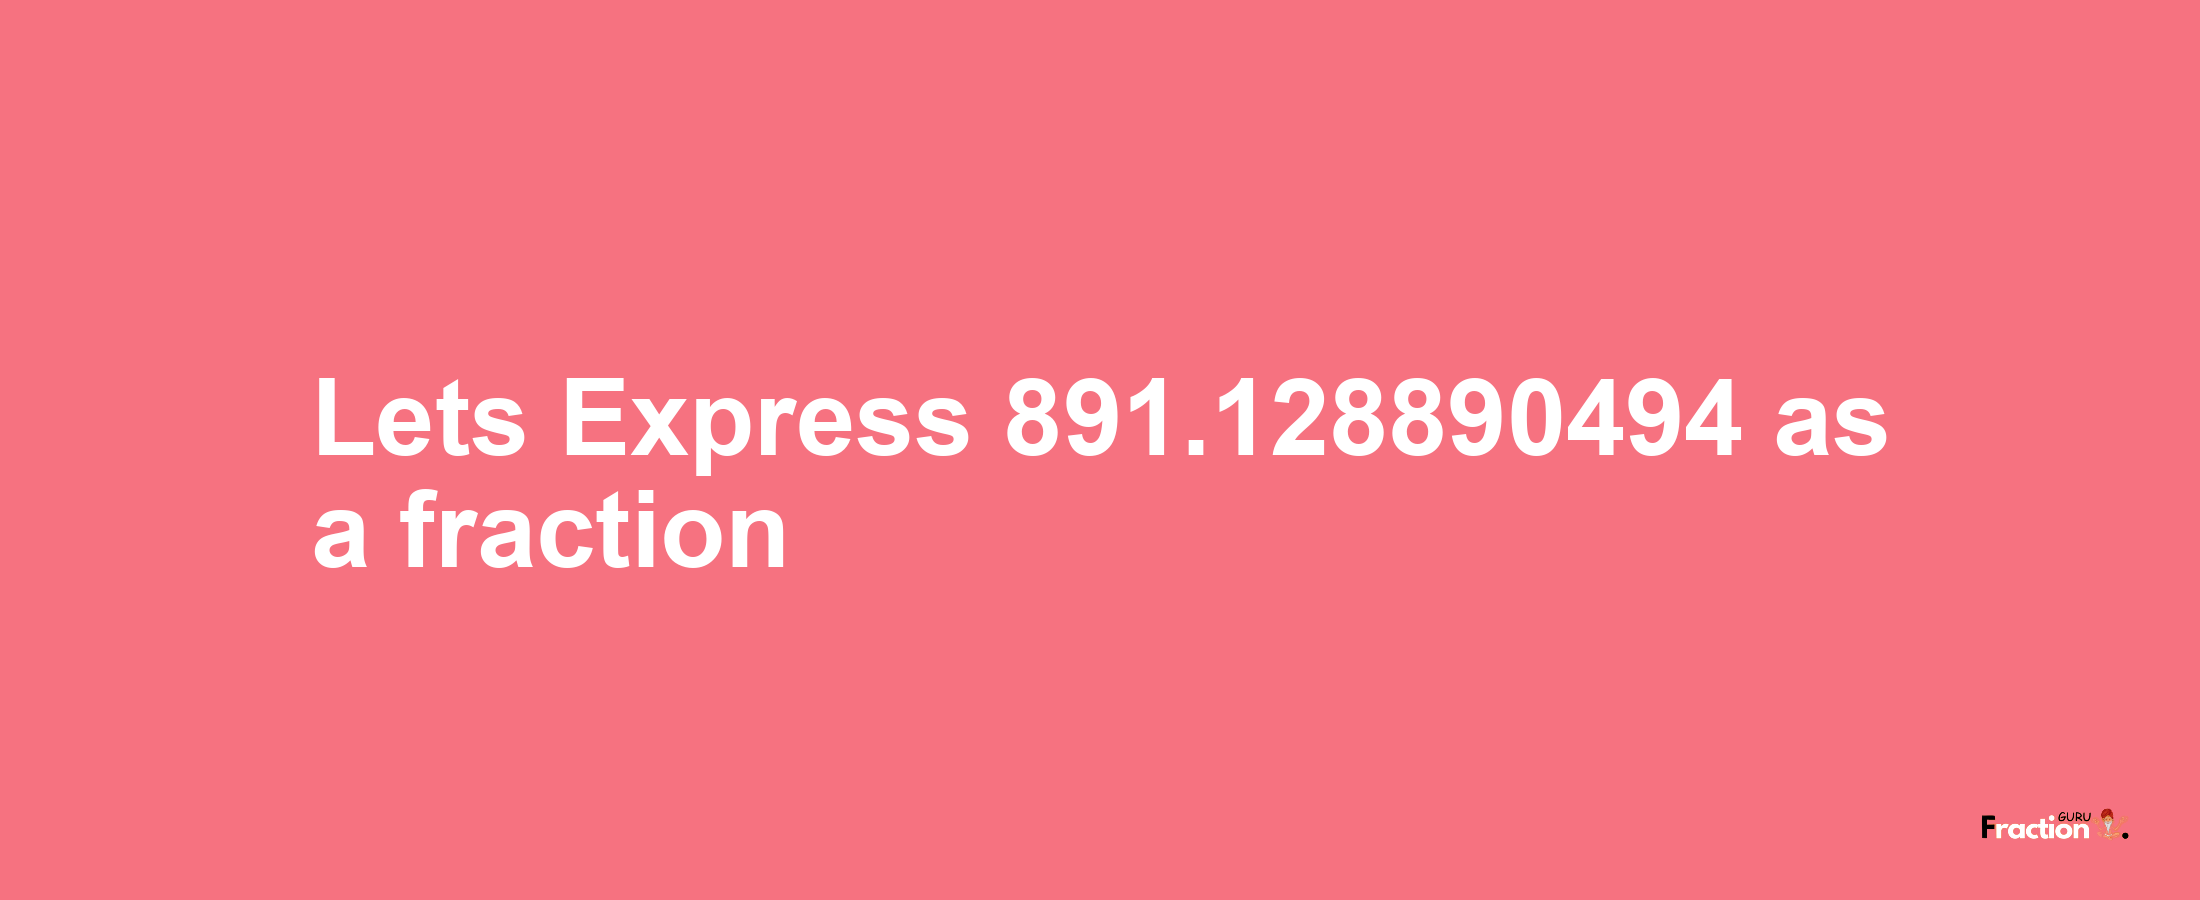 Lets Express 891.128890494 as afraction